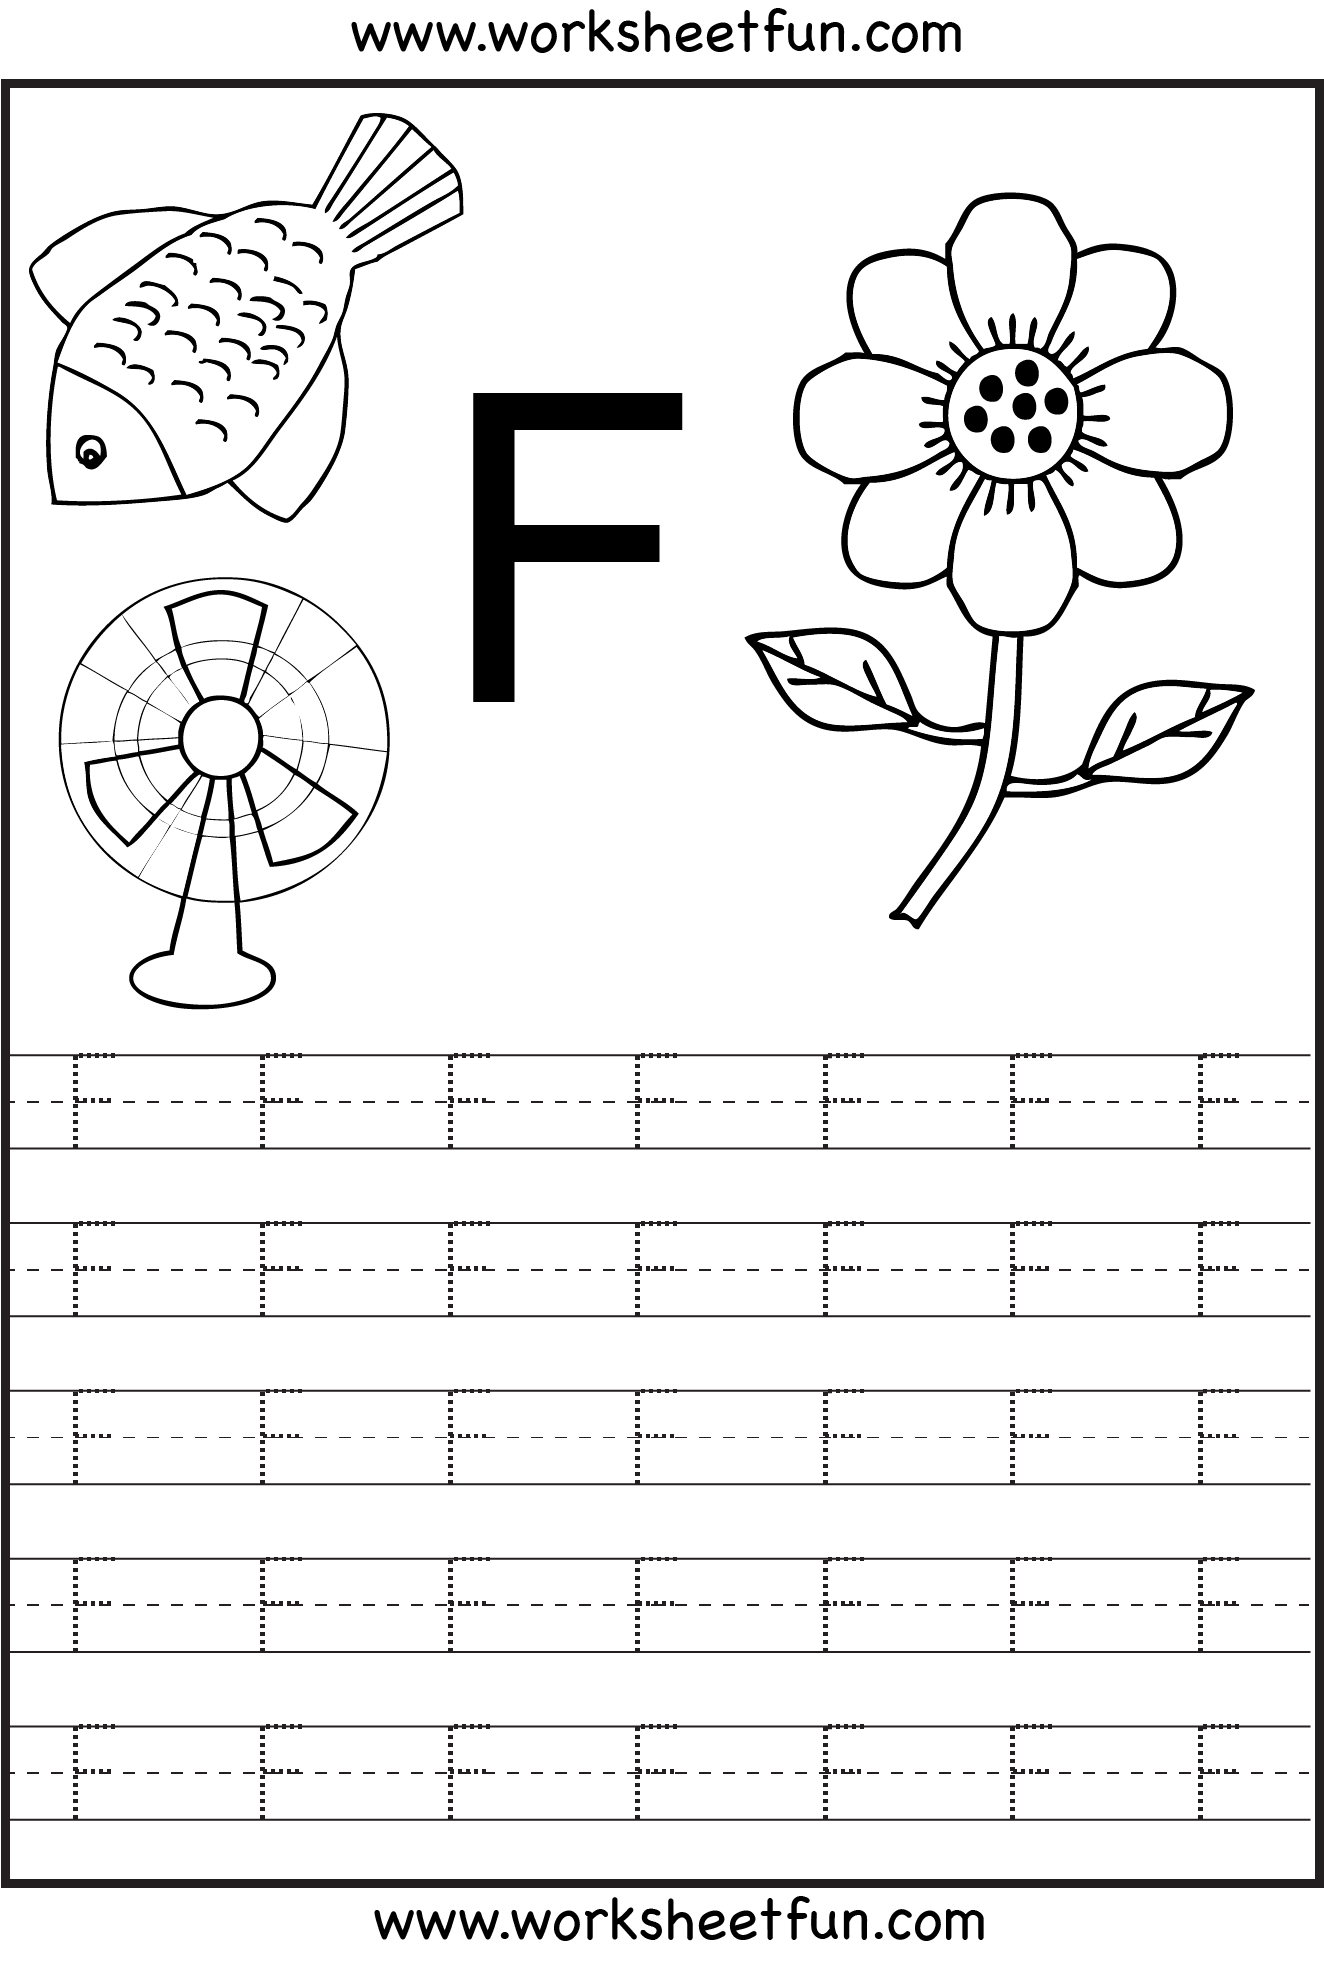 Letter F Worksheets H3dwallpapers High Definition Free Wallpapers Backgro Alphabet Writing Worksheets Printable Preschool Worksheets Preschool Worksheets